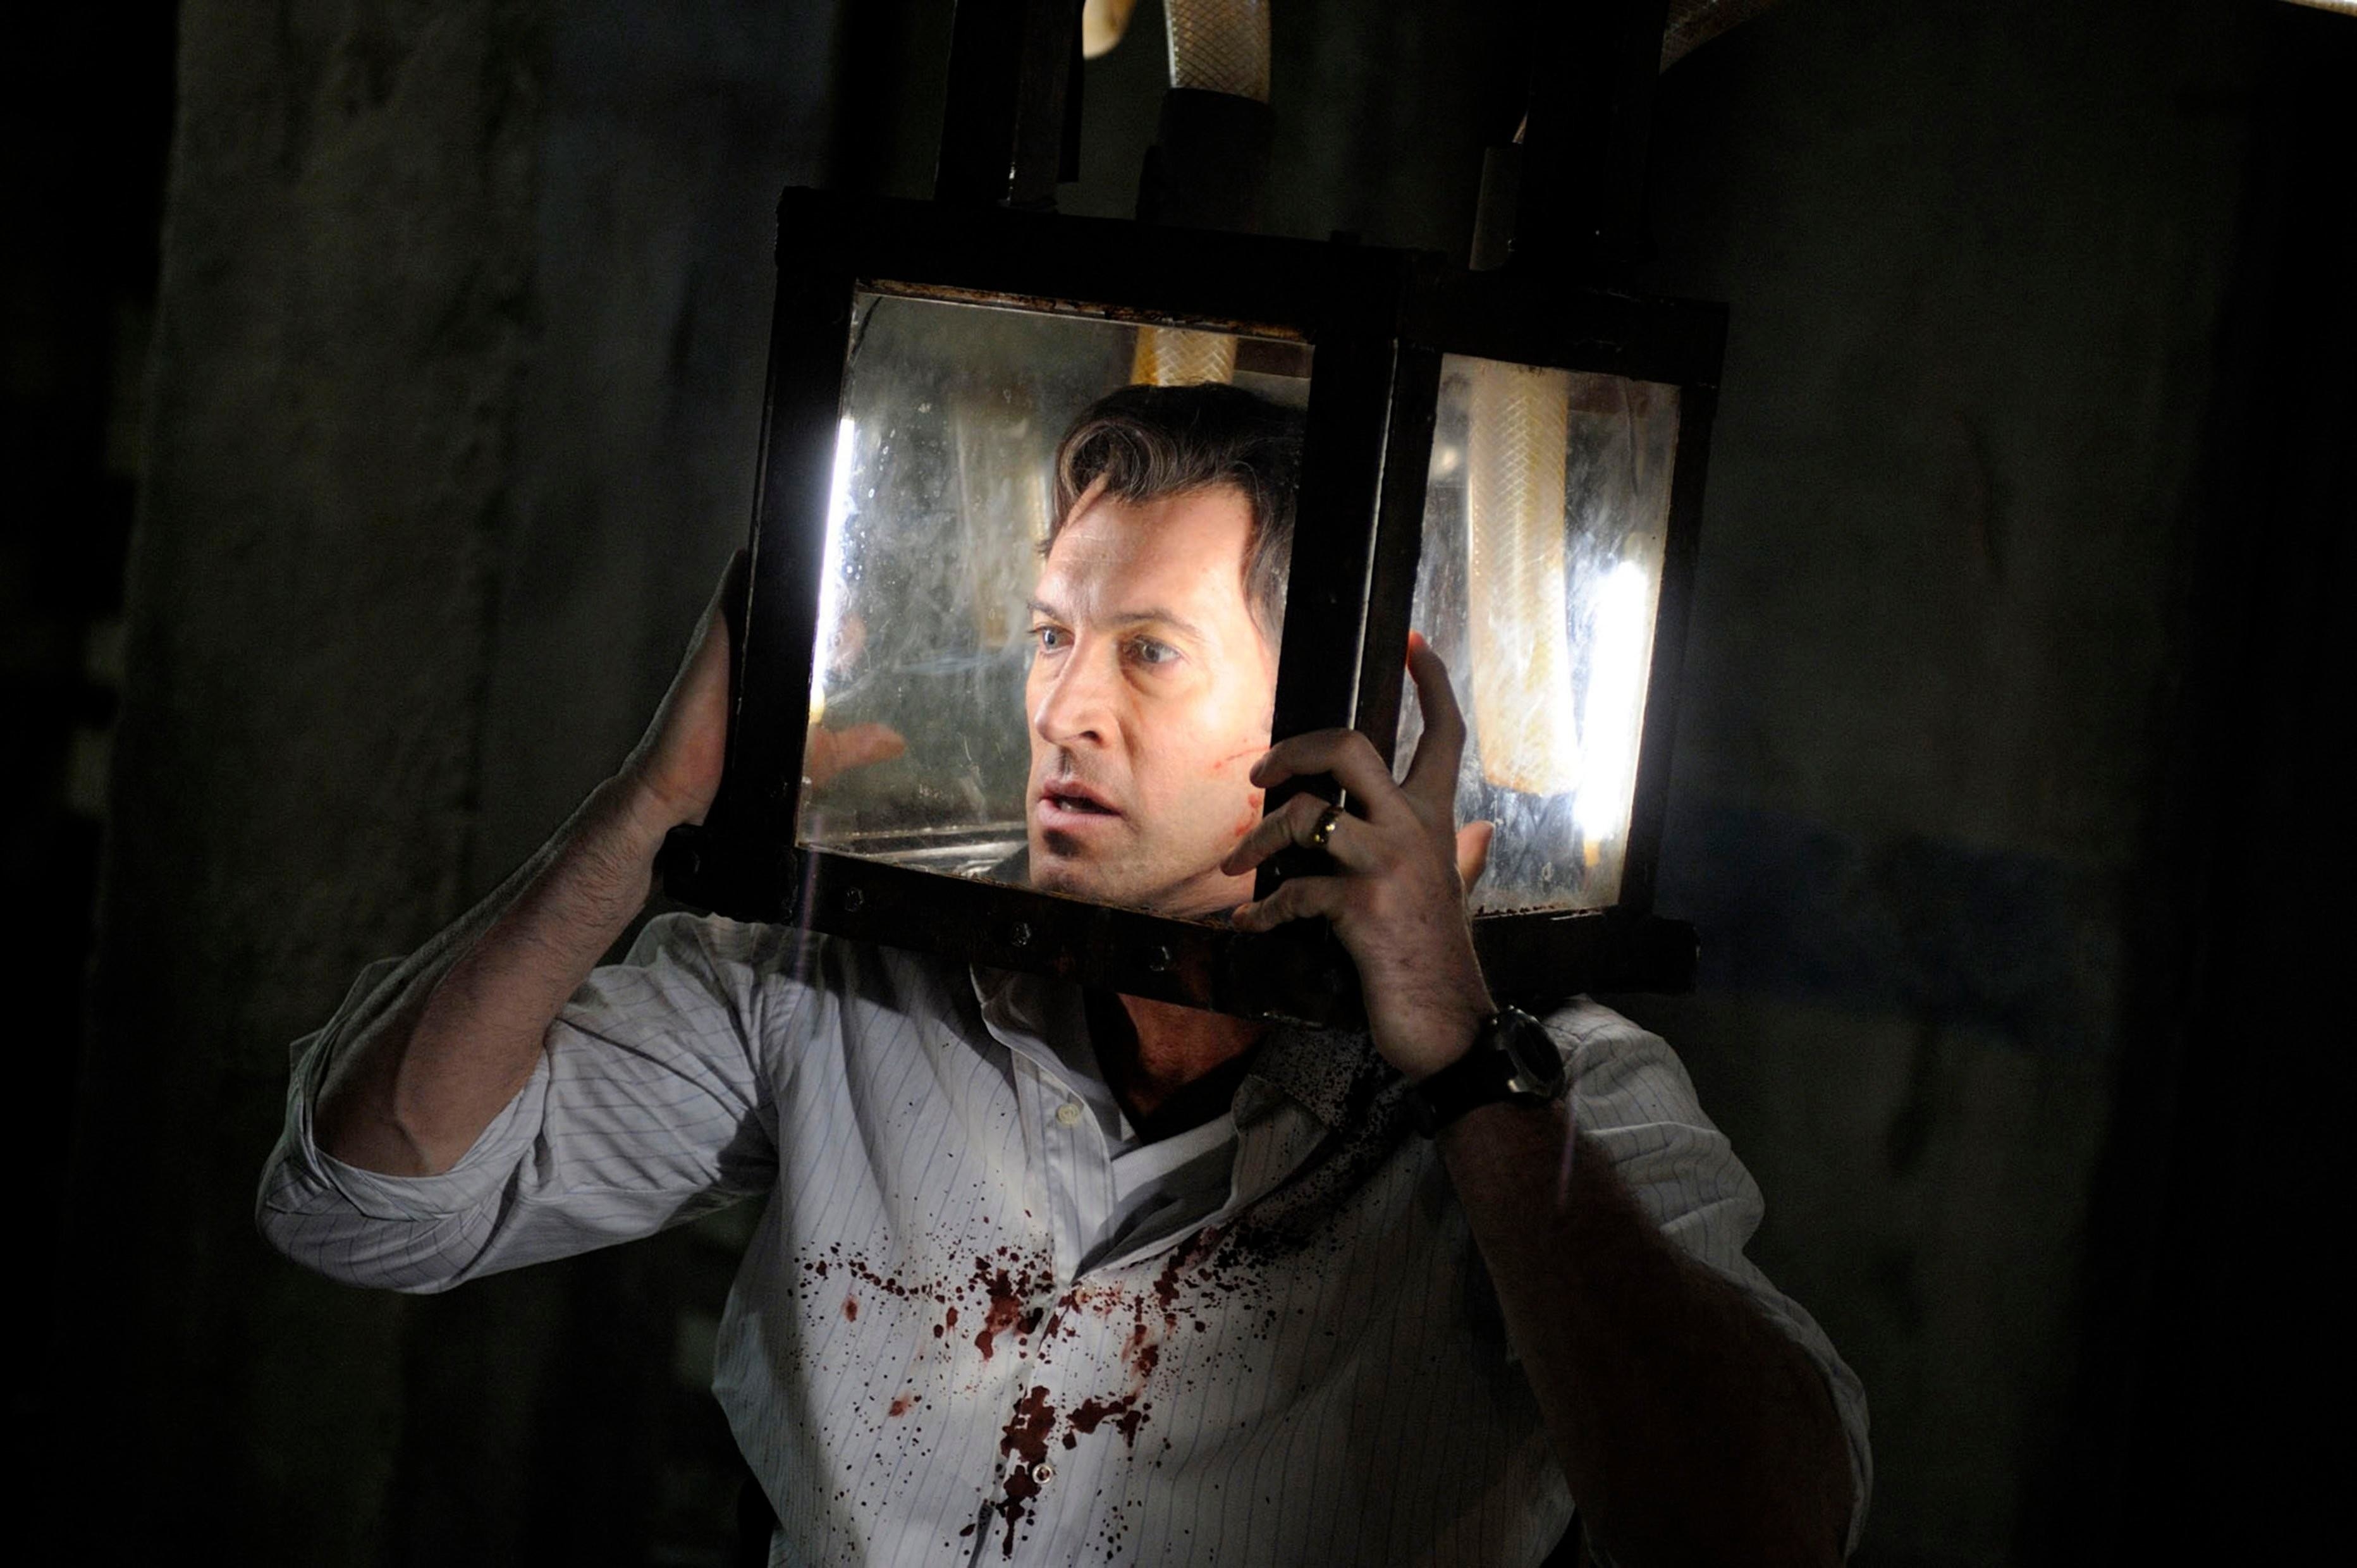 Scott Patterson, wearing a blood-stained shirt, stands with a glass box on his head.